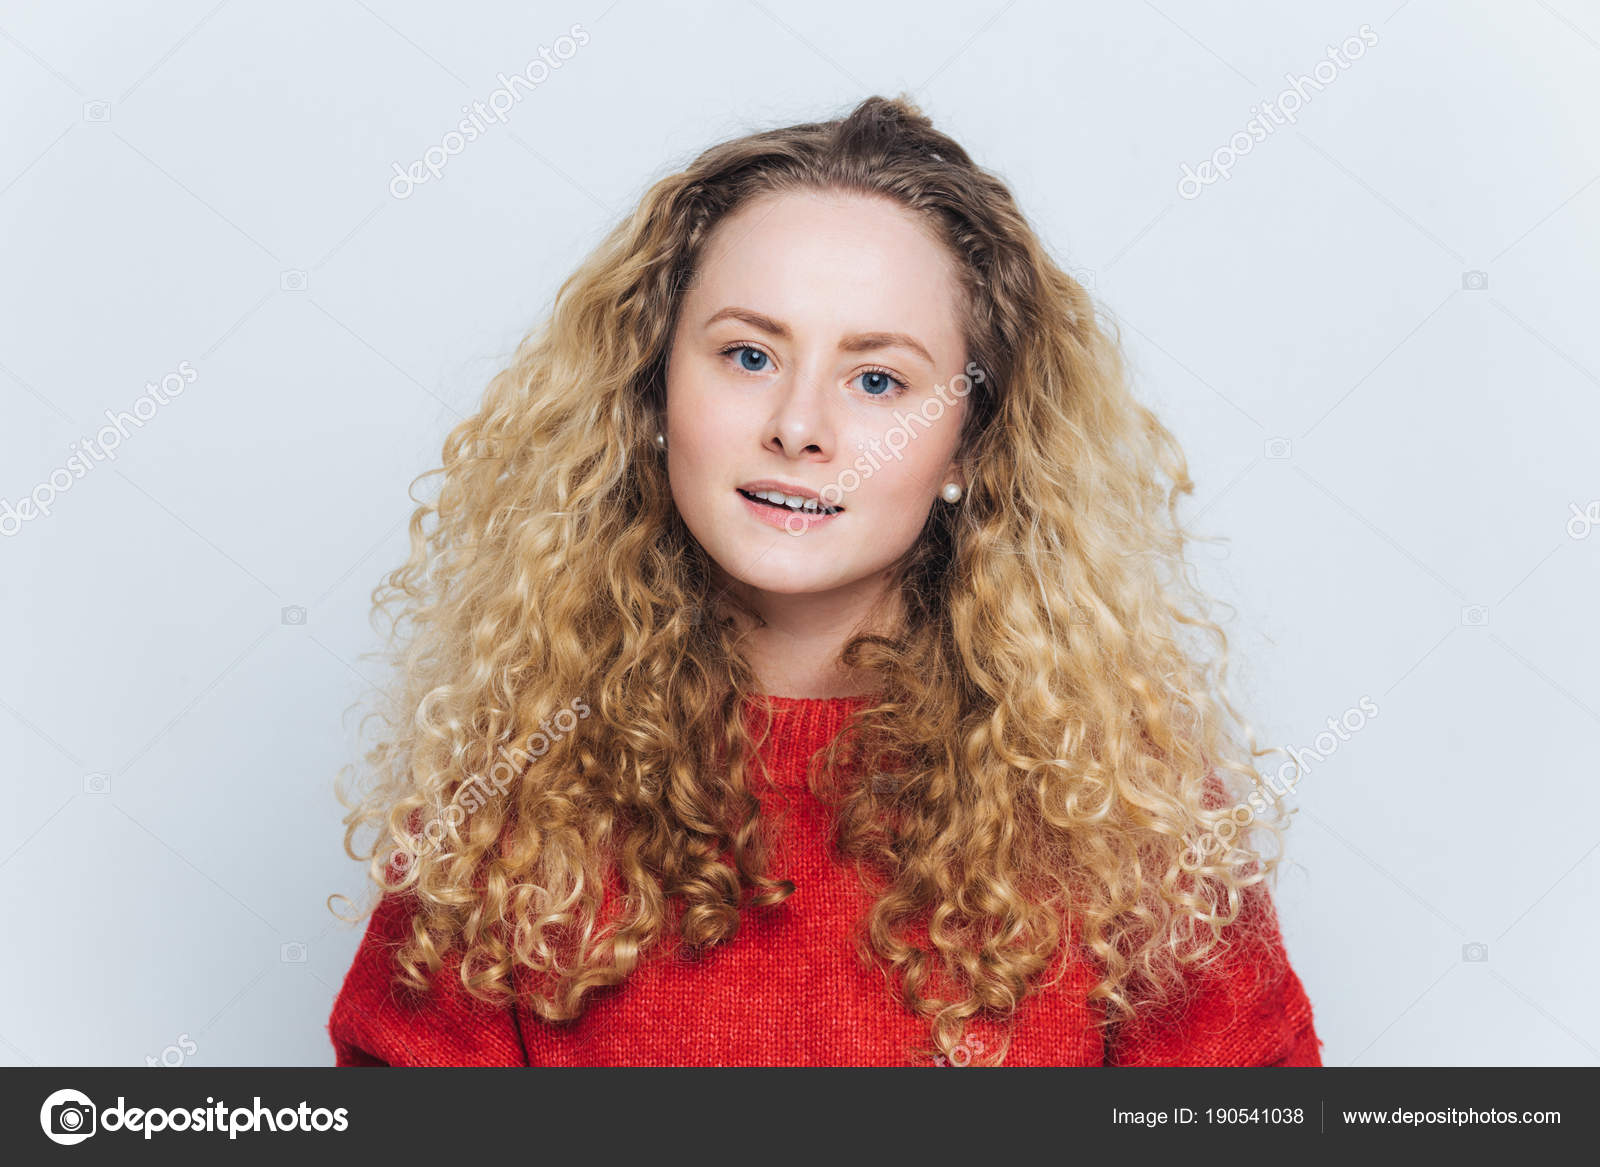 Satisfied Adorable Blue Eyed Female With Curly Light Hair Wears Red Sweater Has Curious Expression Isolated Over White Background Attractive Woman Has Blonde Hair Poses In Studio Alone Stock Photo C